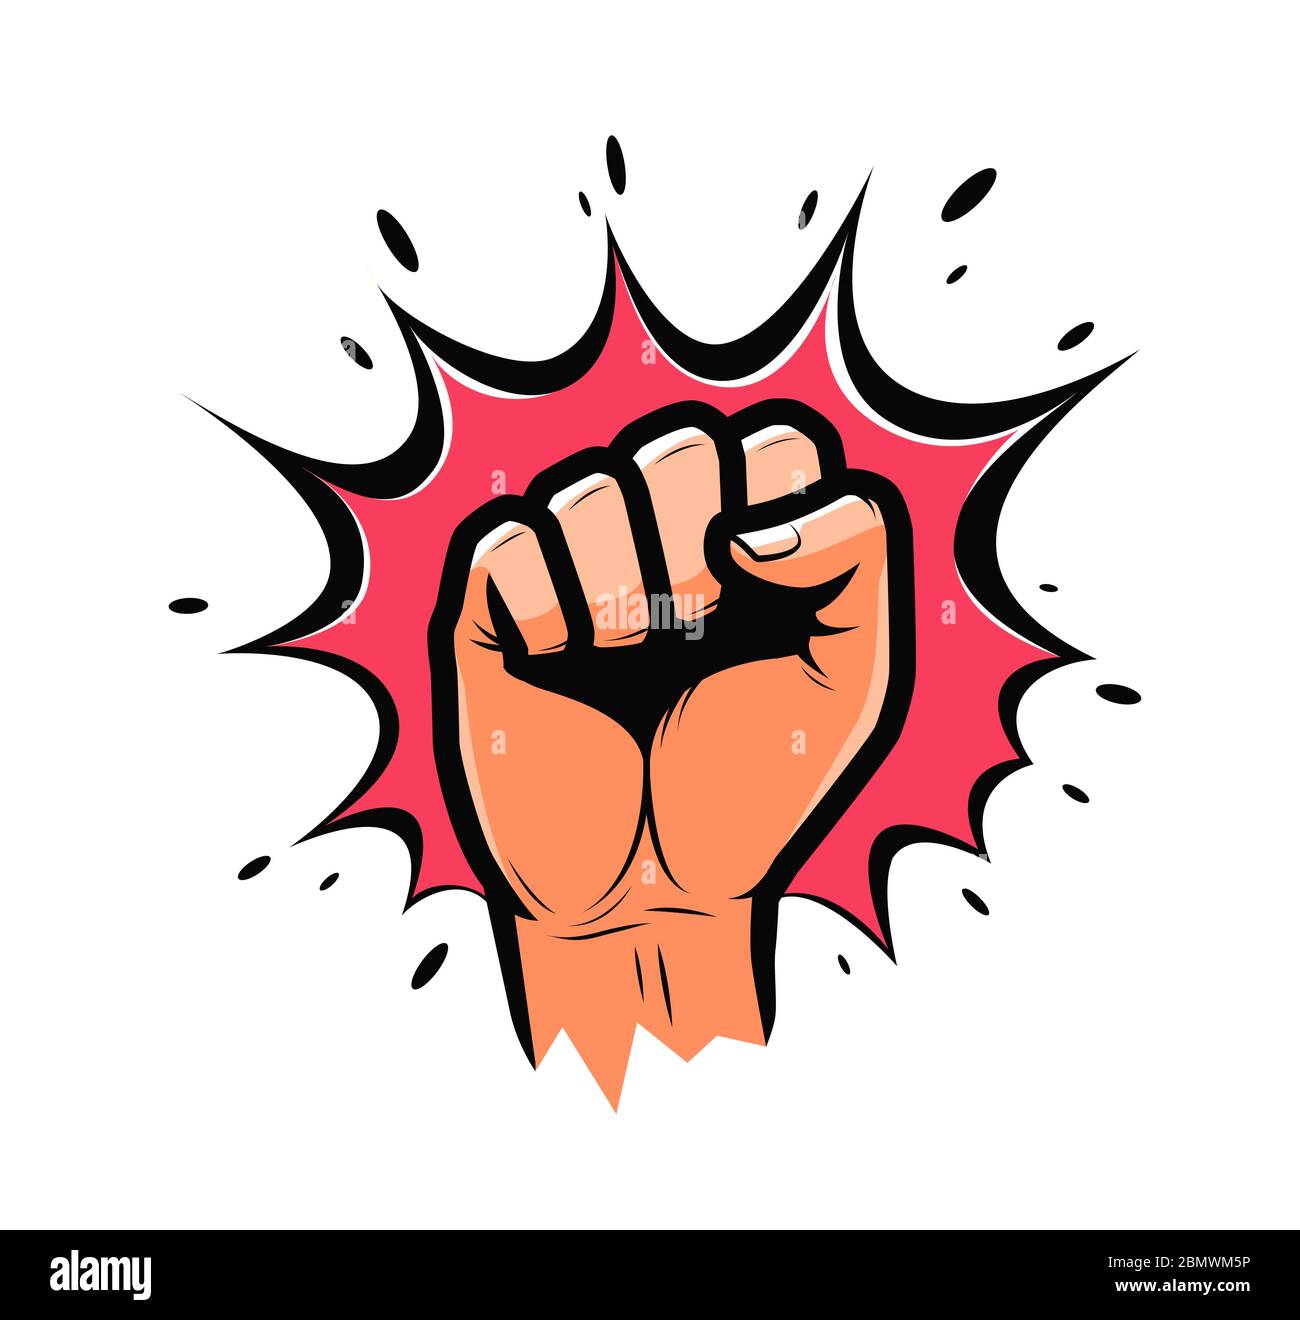 Clenched fist held high in protest. Strength, force vector illustration Stock Vector